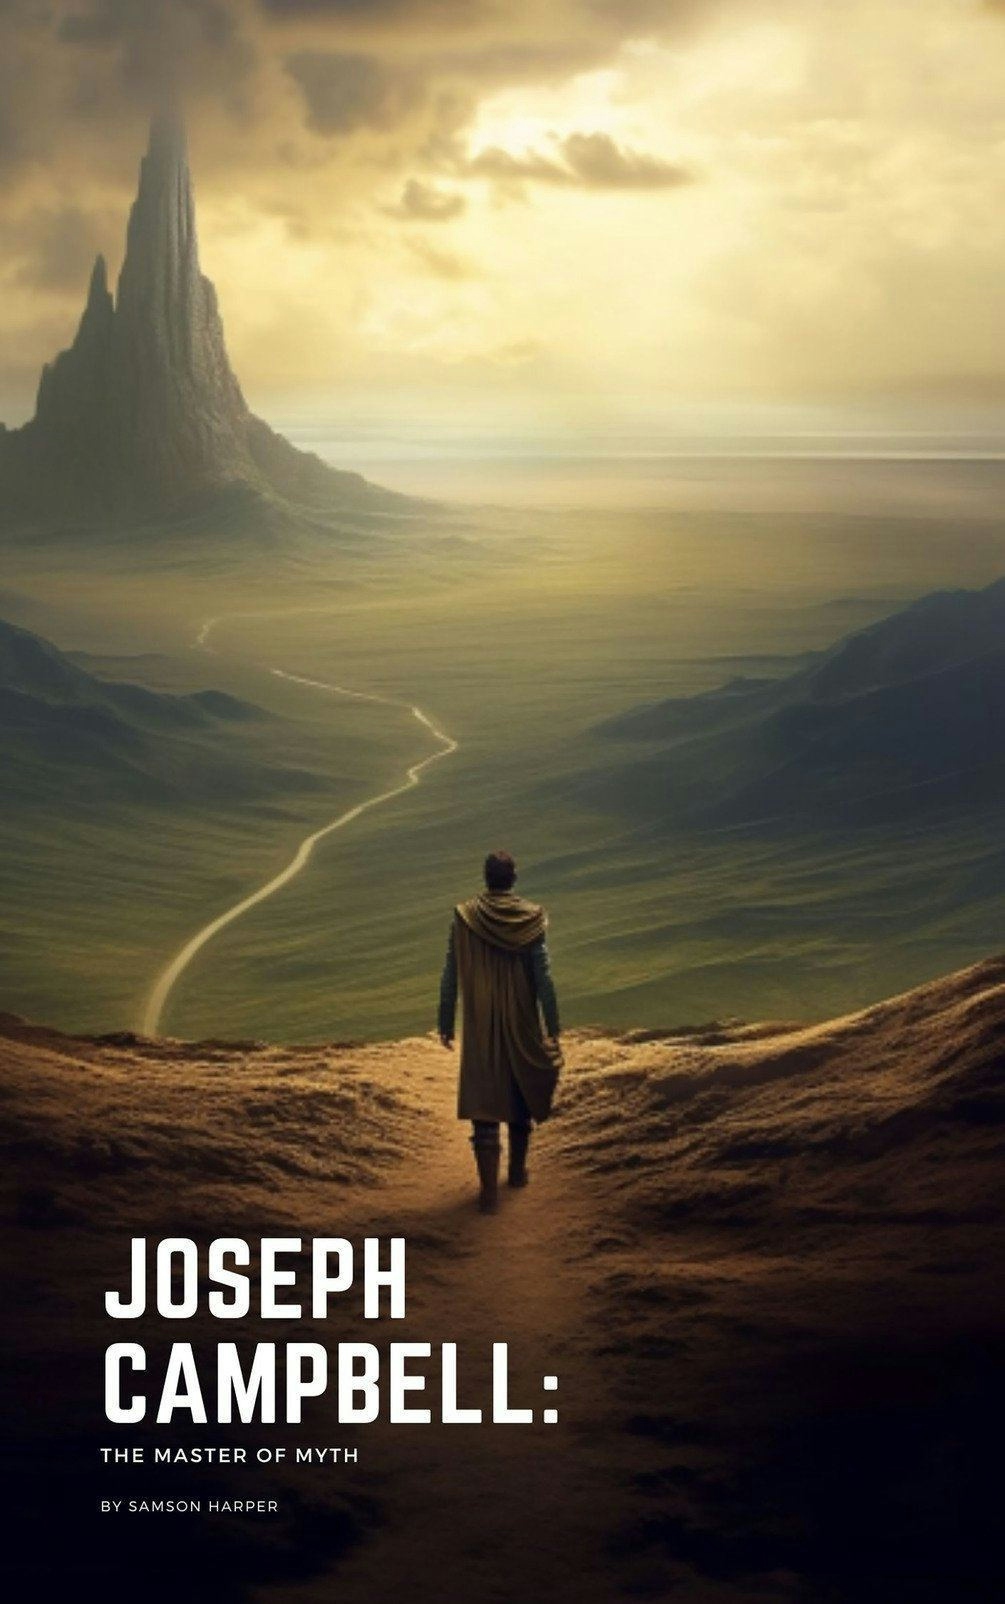 Joseph Campbell: The Master of Myth and His Legacy